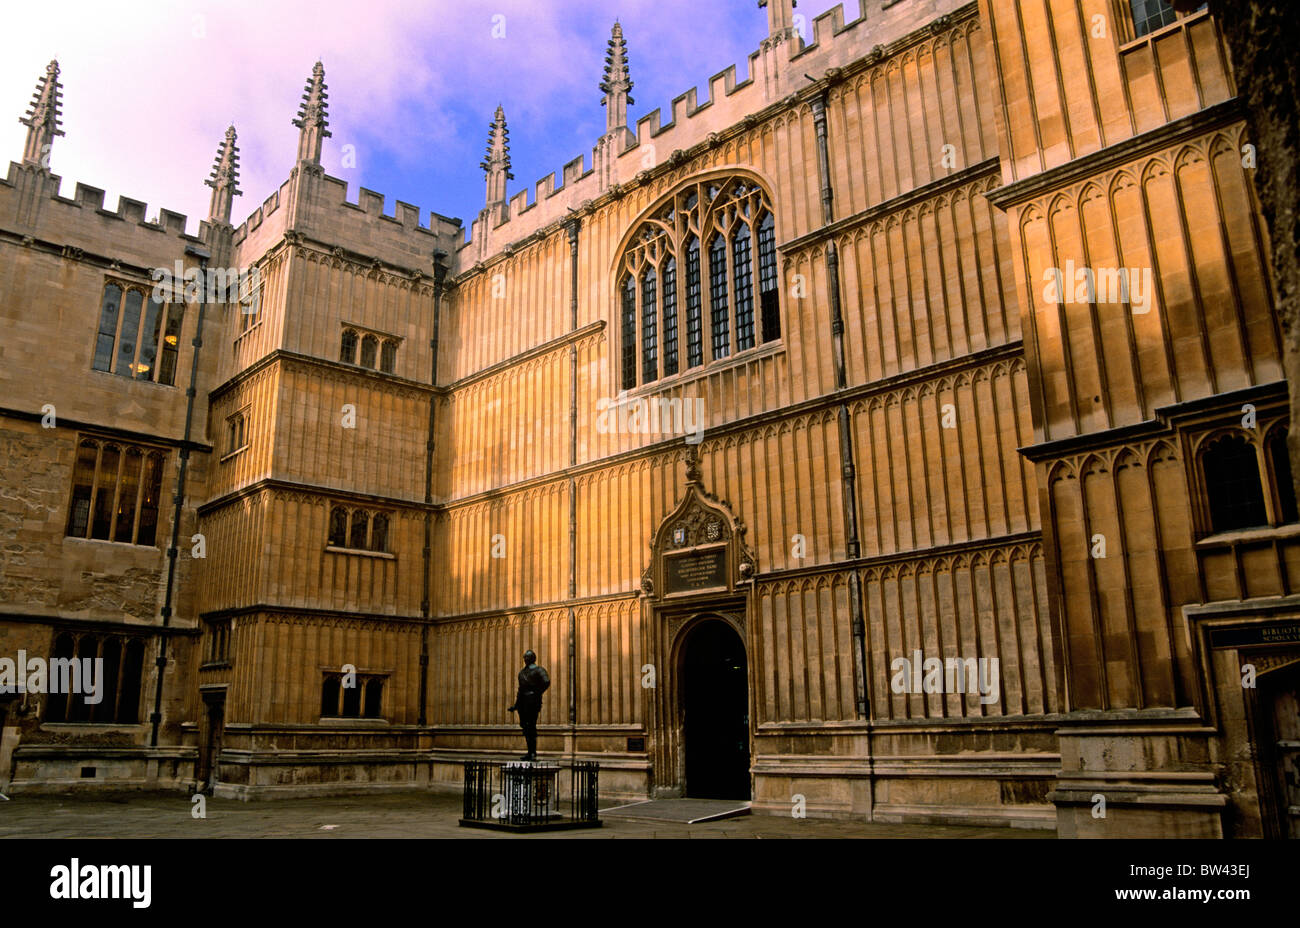 Divinity School, Bodleian Library, Oxford, England Stock Photo